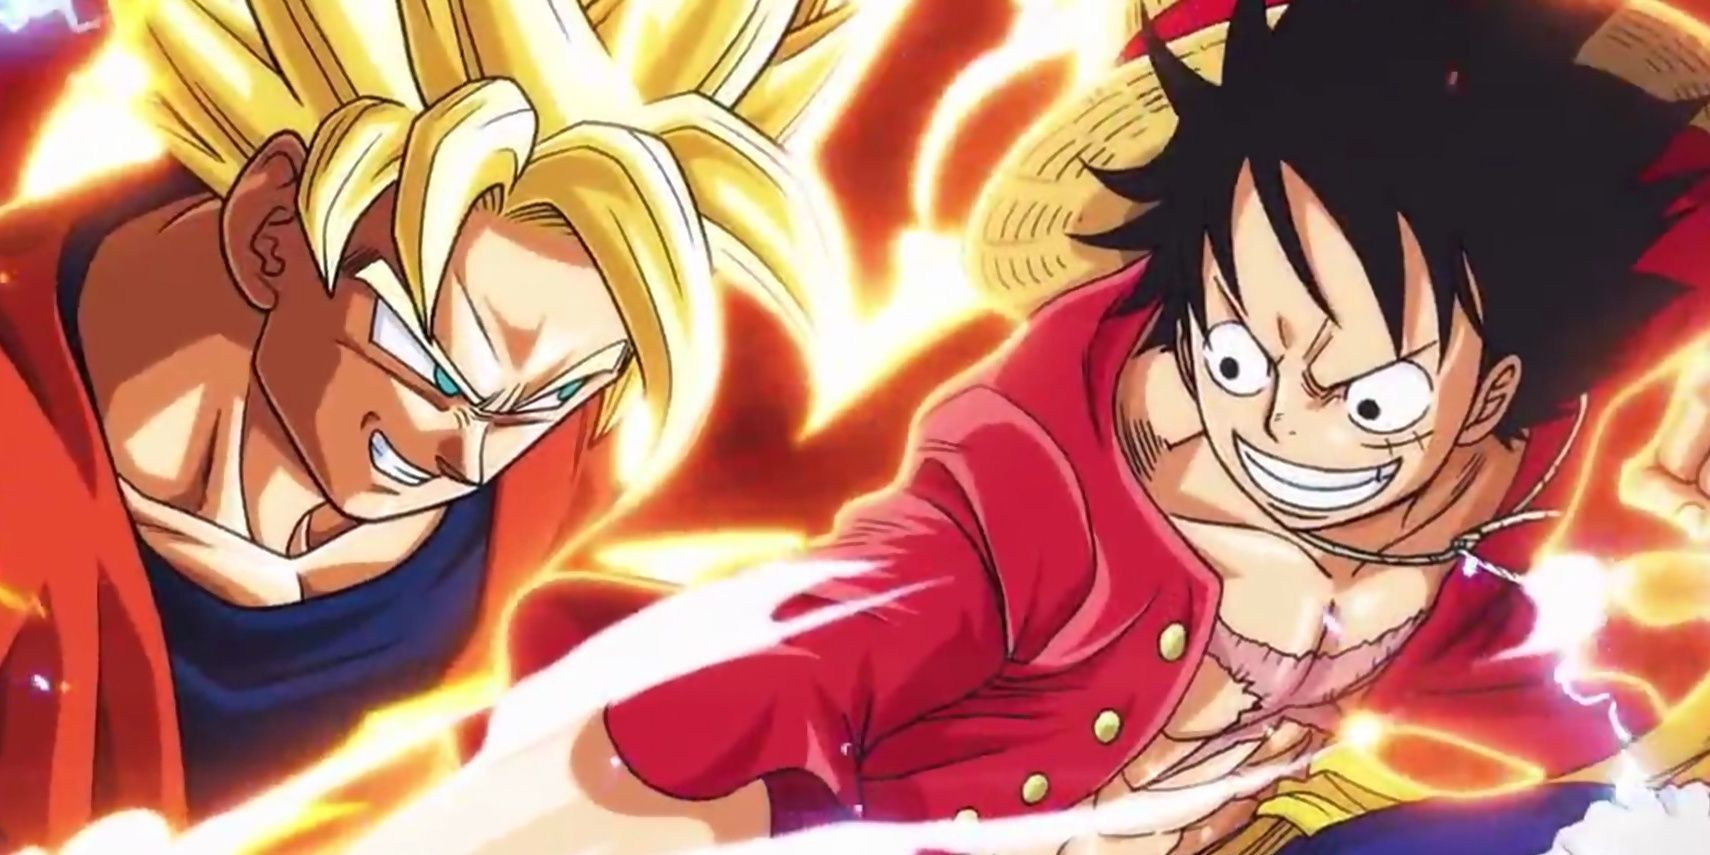 This Dragon Ballone Piece Crossover Saw Goku Fight Enel